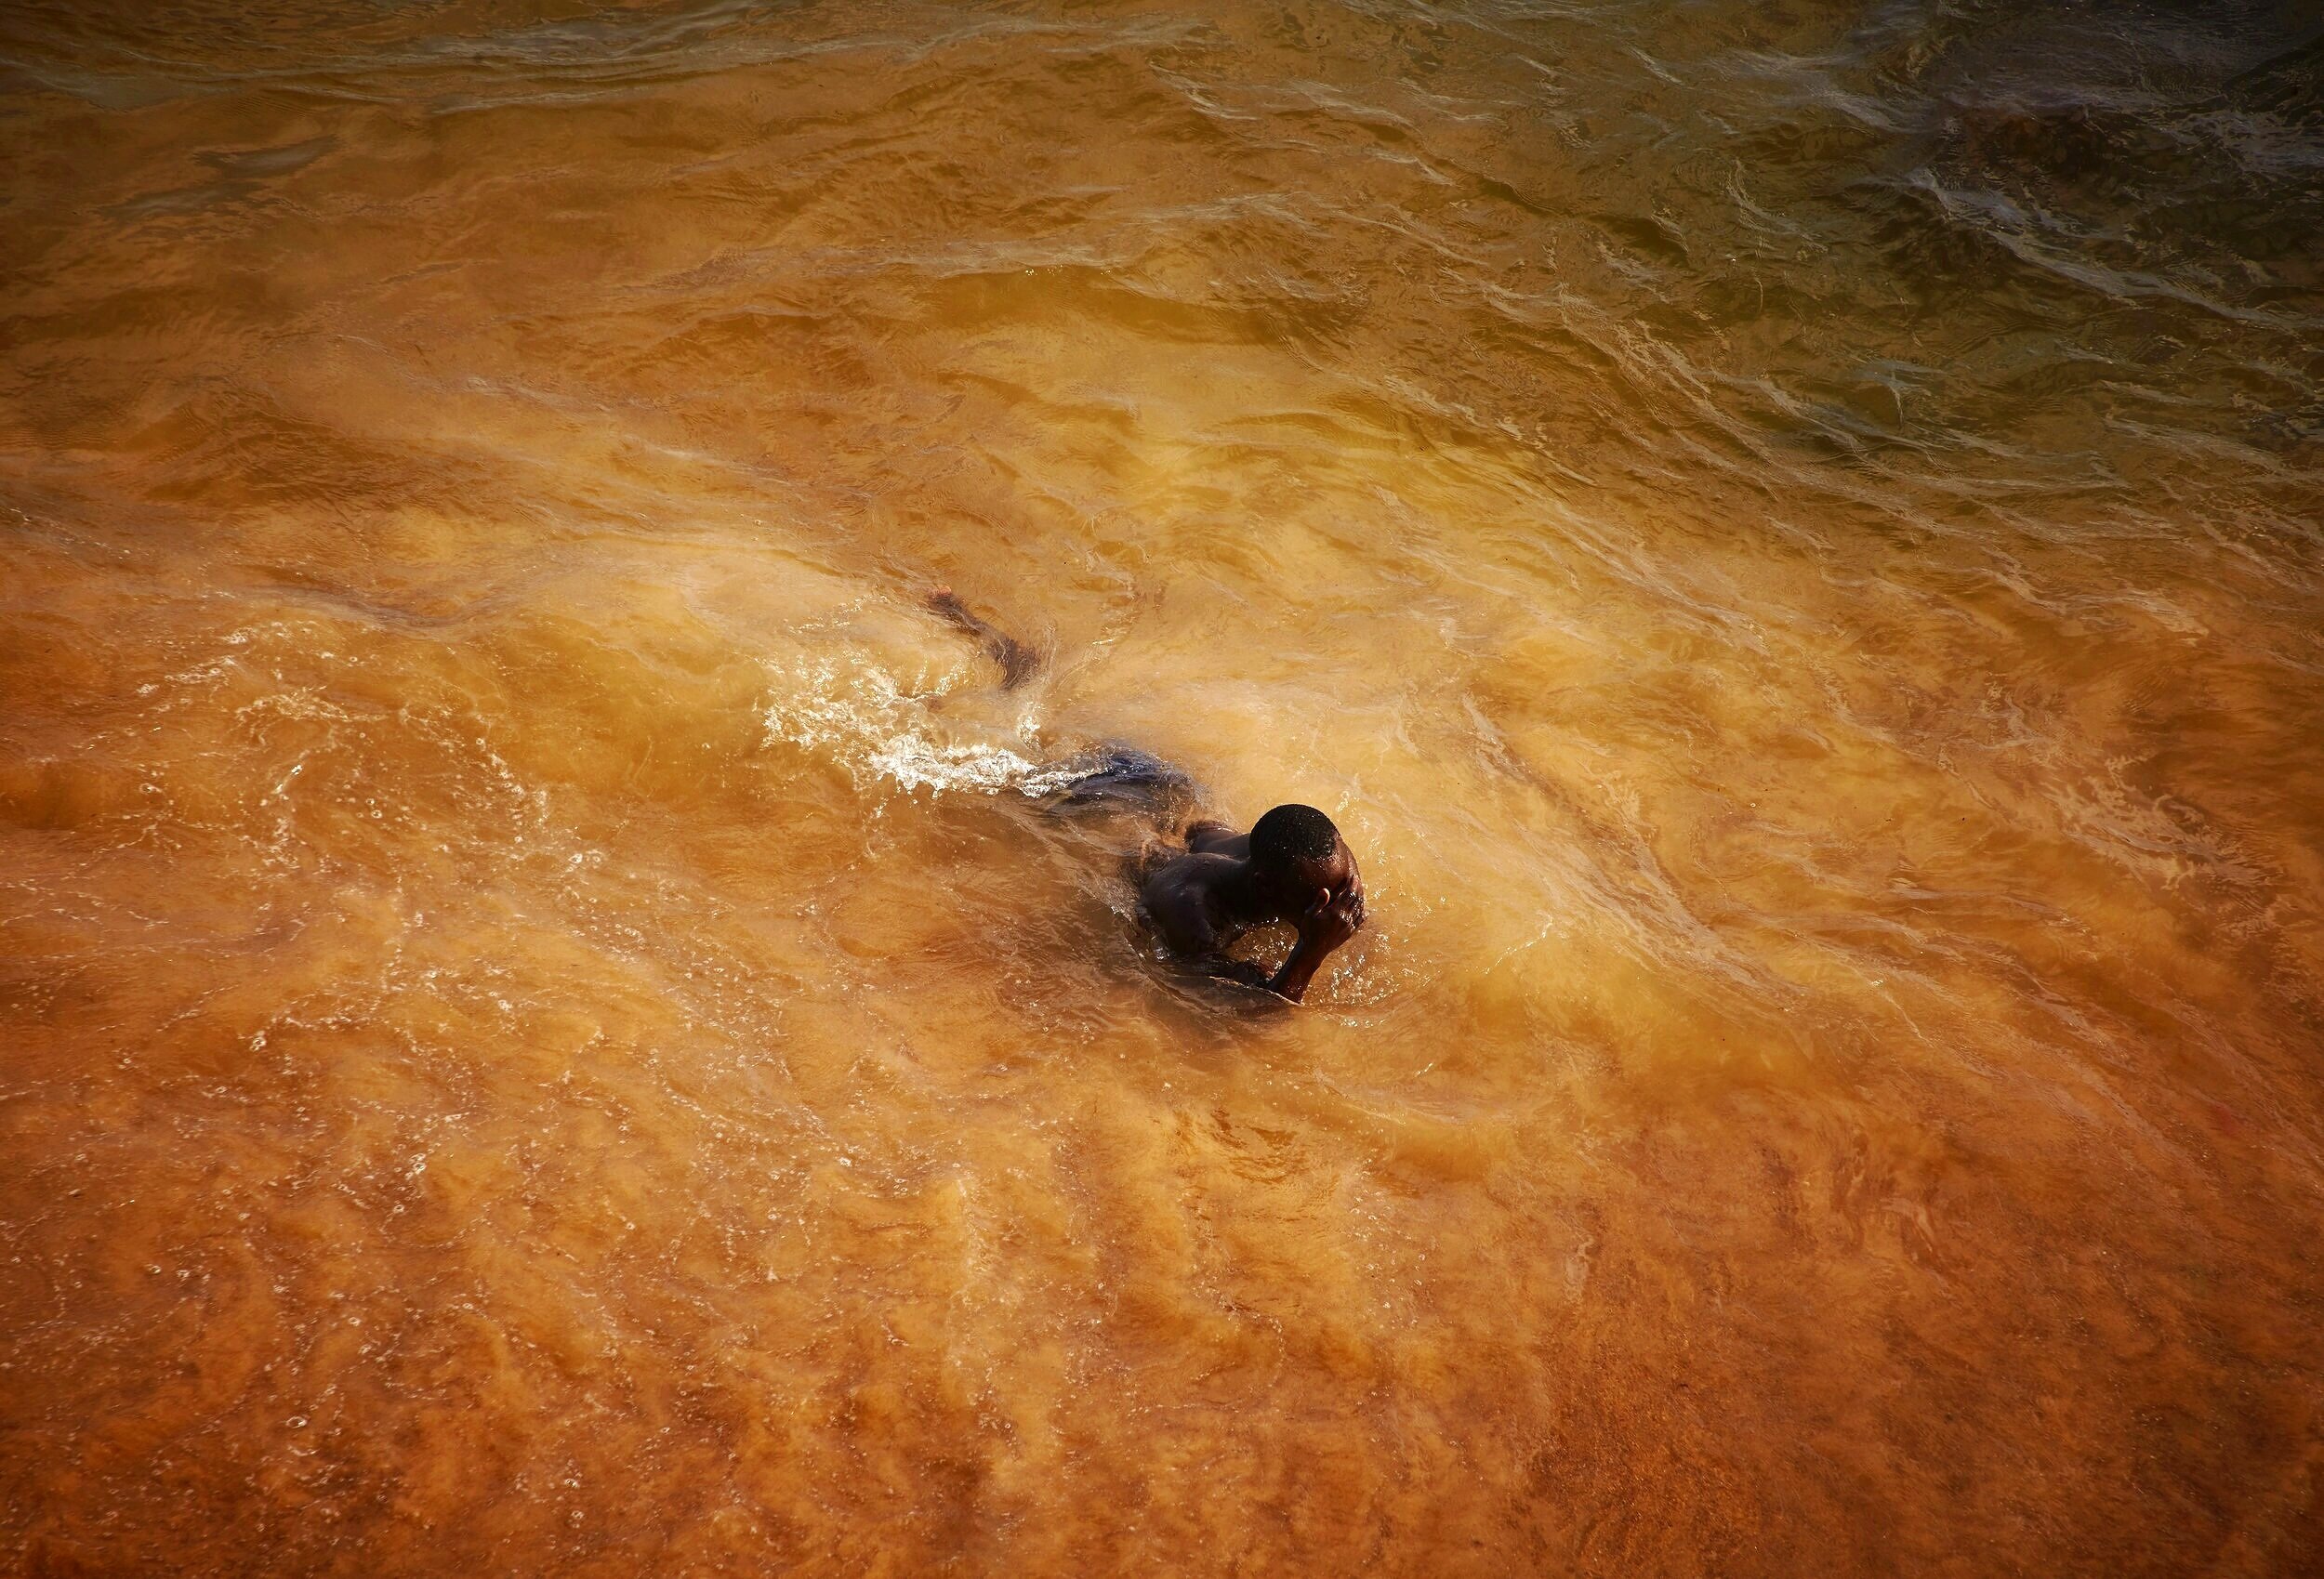  Babacar Diallo swims in the ocean in Saly, Senegal 